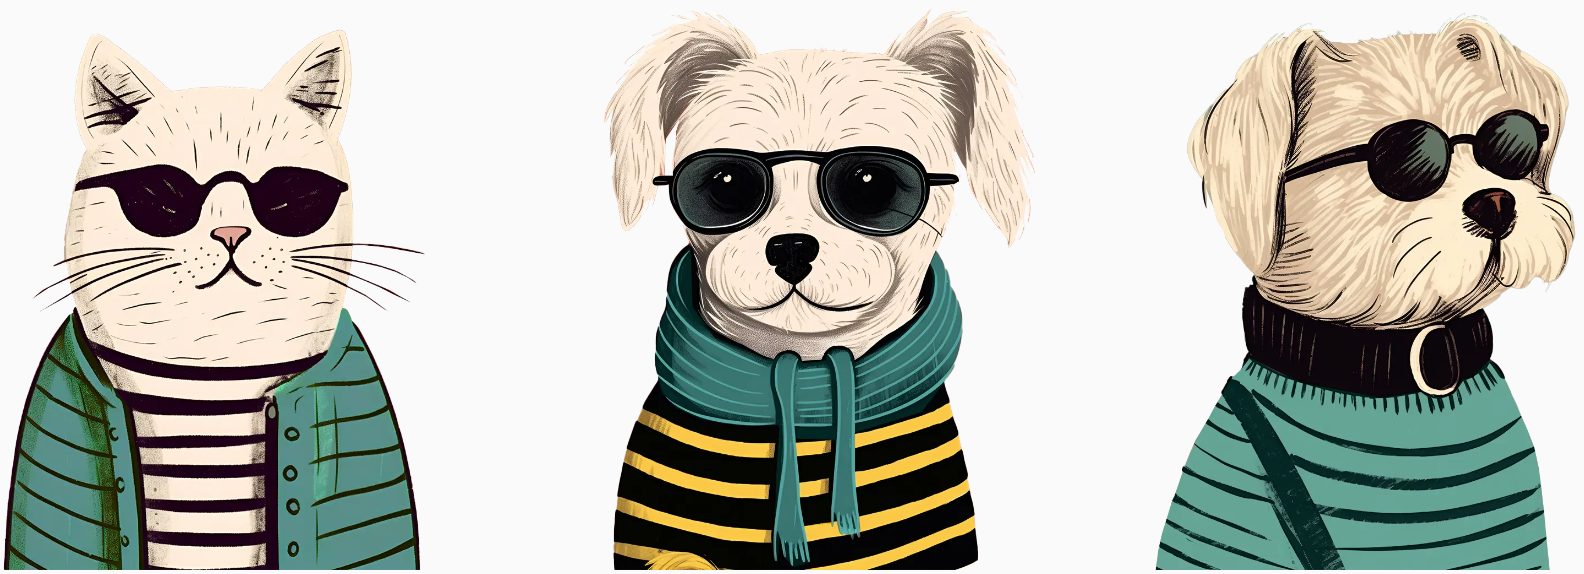 IPG’s Pawsitively Awesome Illustrations